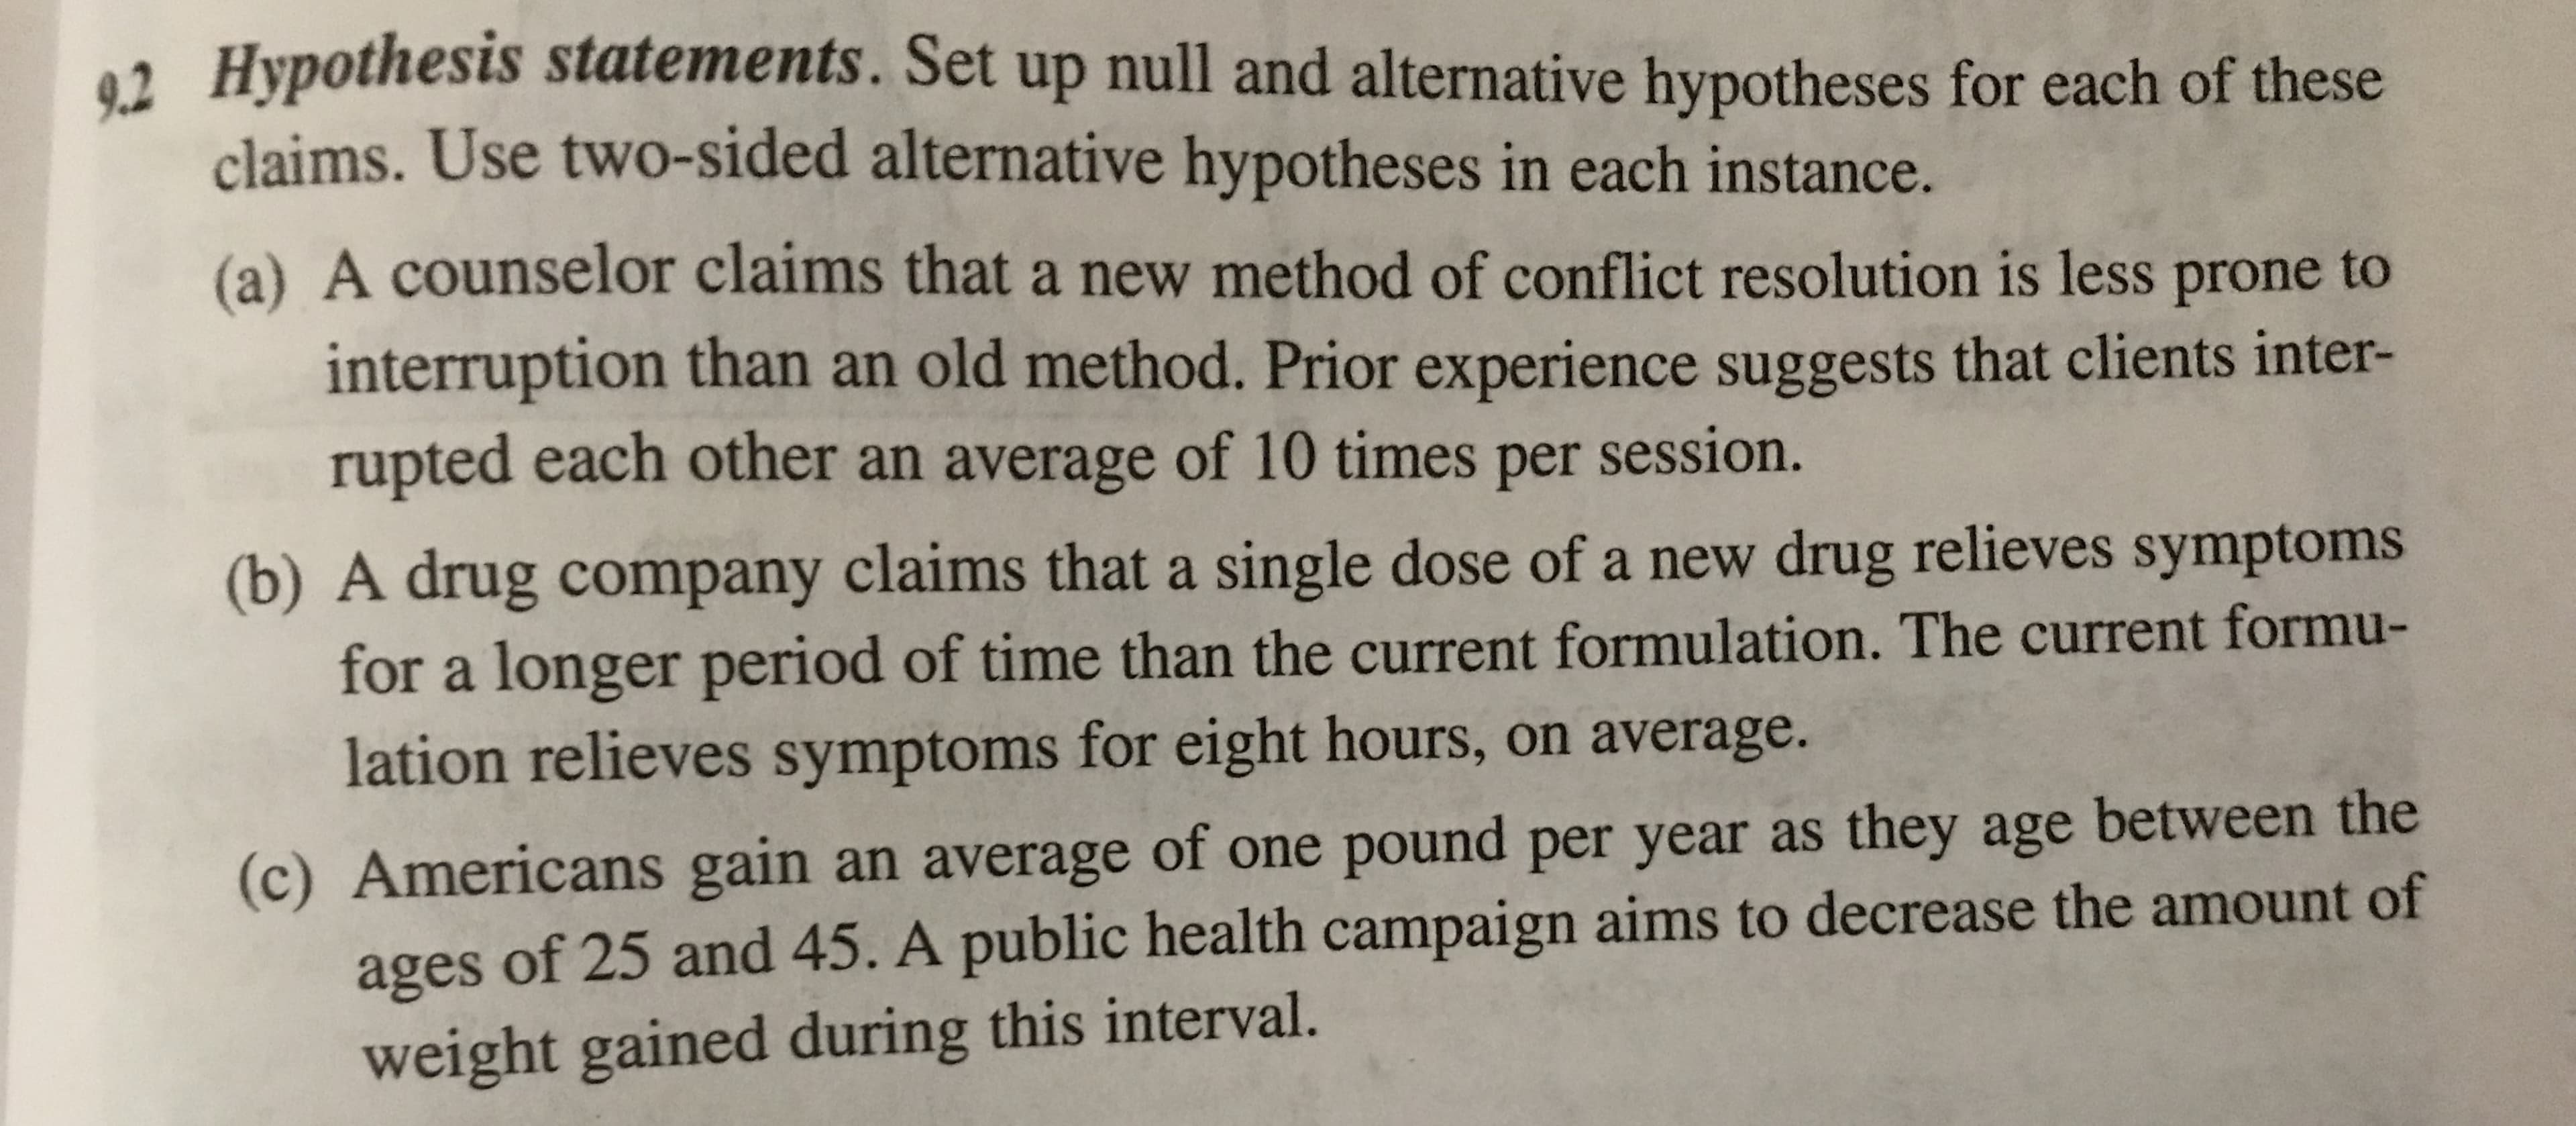 2 Hypothesis statements. Set up null and alternative hypotheses for each of these
claims. Use two-sided alternative hypotheses in each instance.
(a) A counselor claims that a new method of conflict resolution is less prone to
interruption than an old method. Prior experience suggests that clients inter
rupted each other an average of 10 times per session.
(b) A drug company claims that a single dose of a new drug relieves symptoms
for a longer period of time than the current formulation. The current formu-
lation relieves symptoms for eight hours, on average.
(c) Americans gain an average of one pound per year as they age between the
ages of 25 and 45. A public health campaign aims to decrease the amount of
weight gained during this interval.
